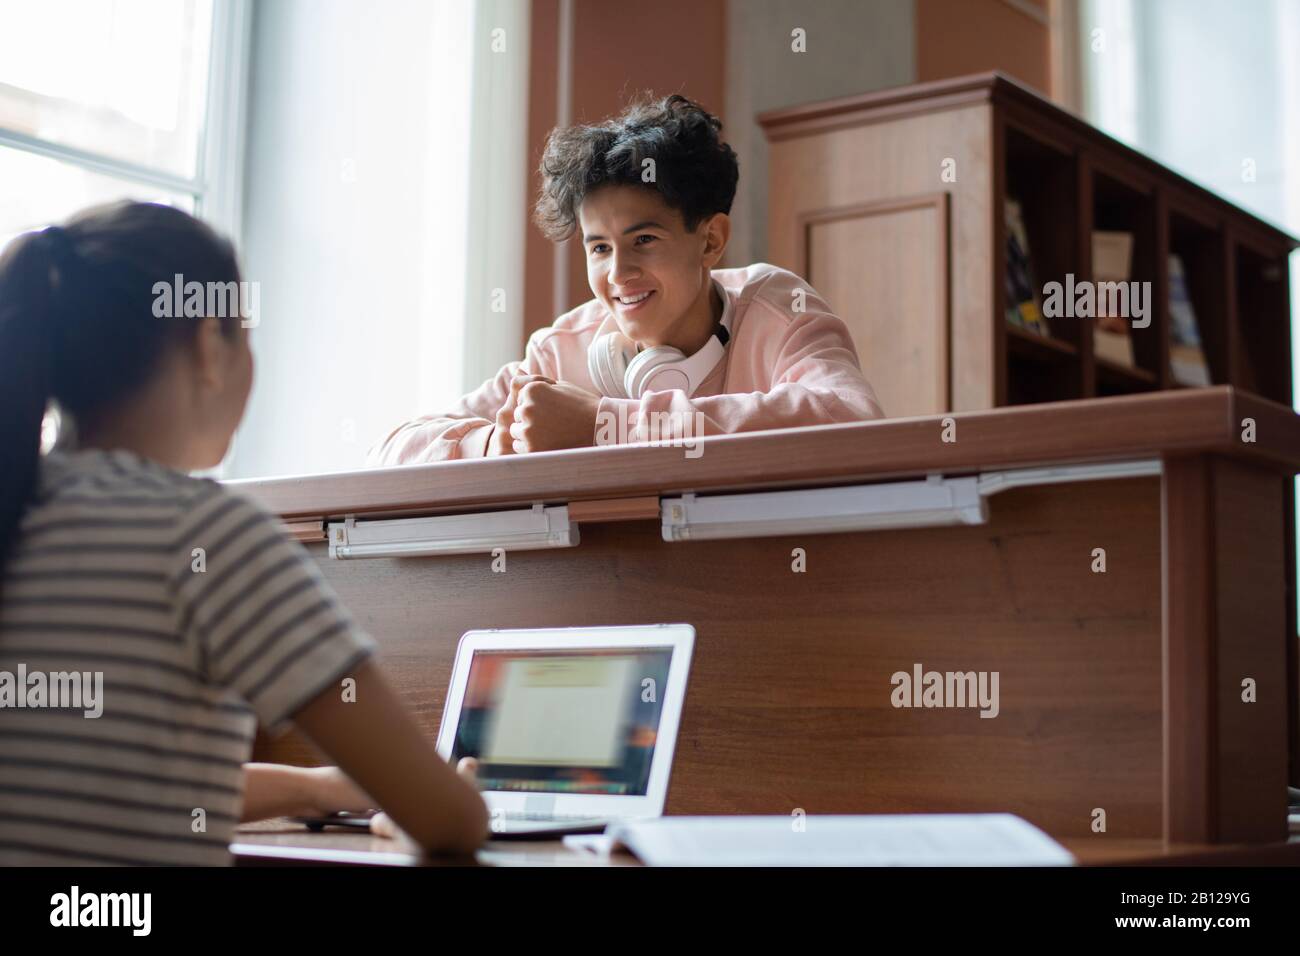 Cheerful teenage boy looking at his groupmate with laptop while asking for help Stock Photo